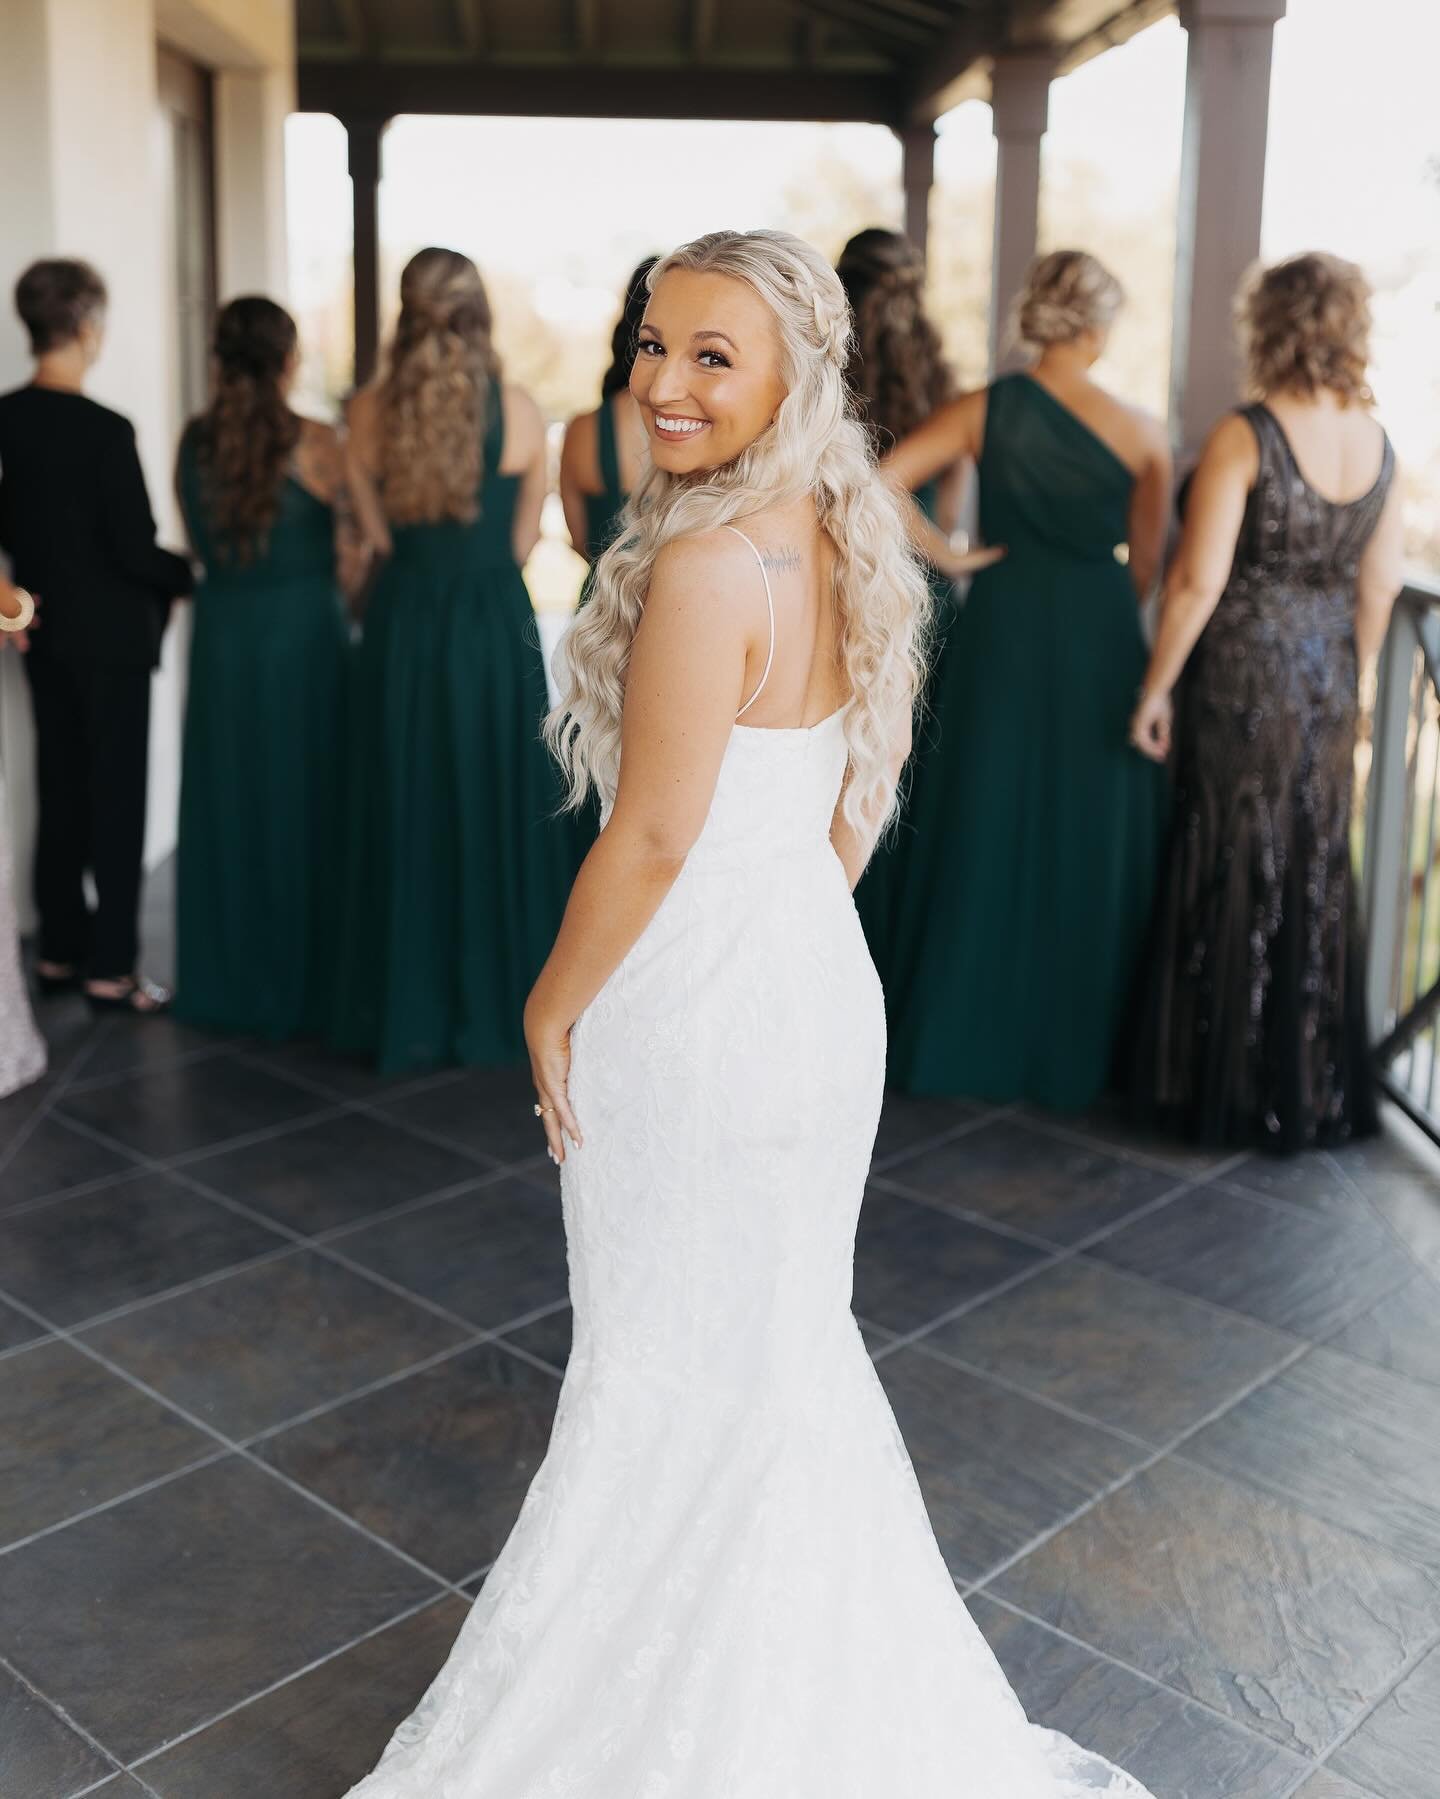 I love how Deanna&rsquo;s skin is glowing in all the photos!✨✨
Photography @shannonfriesphotography 
Venue @nocateecrosswaterhall 
Hair @jackie.maneeventhair 
#staugustinemakeupartist #staugustinemua #staugustinemakeup #staugustineweddings #staugusti